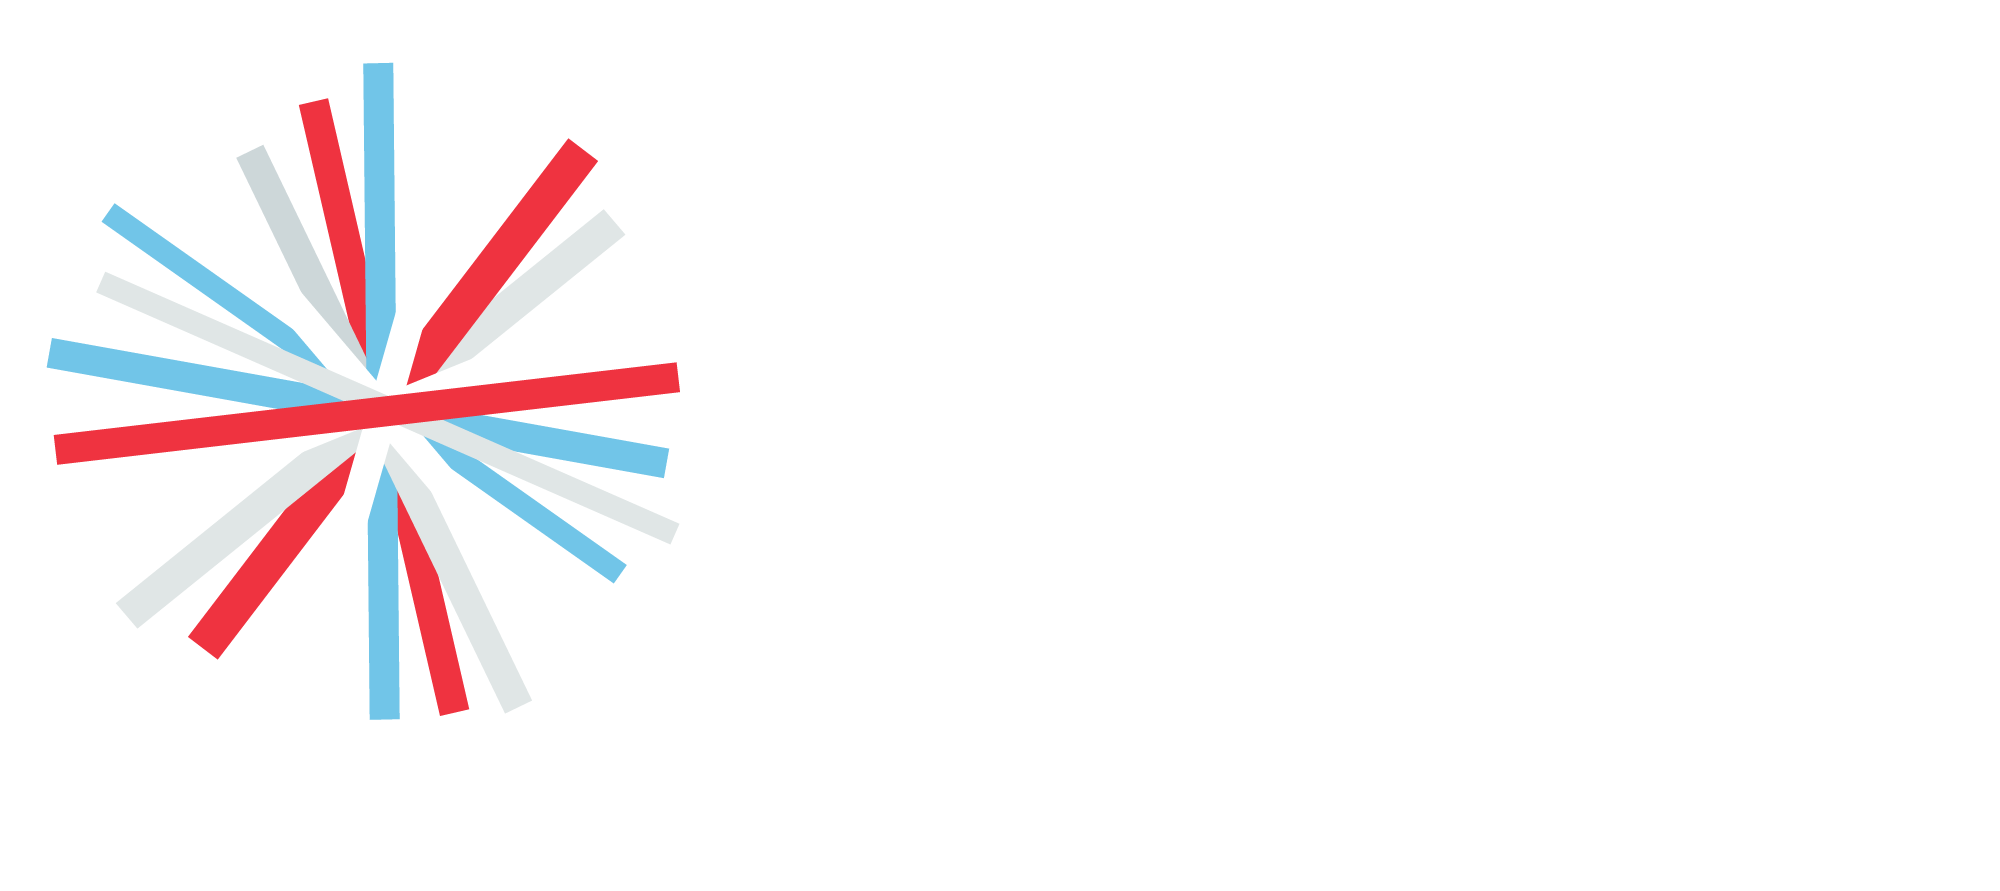 Women in Payments